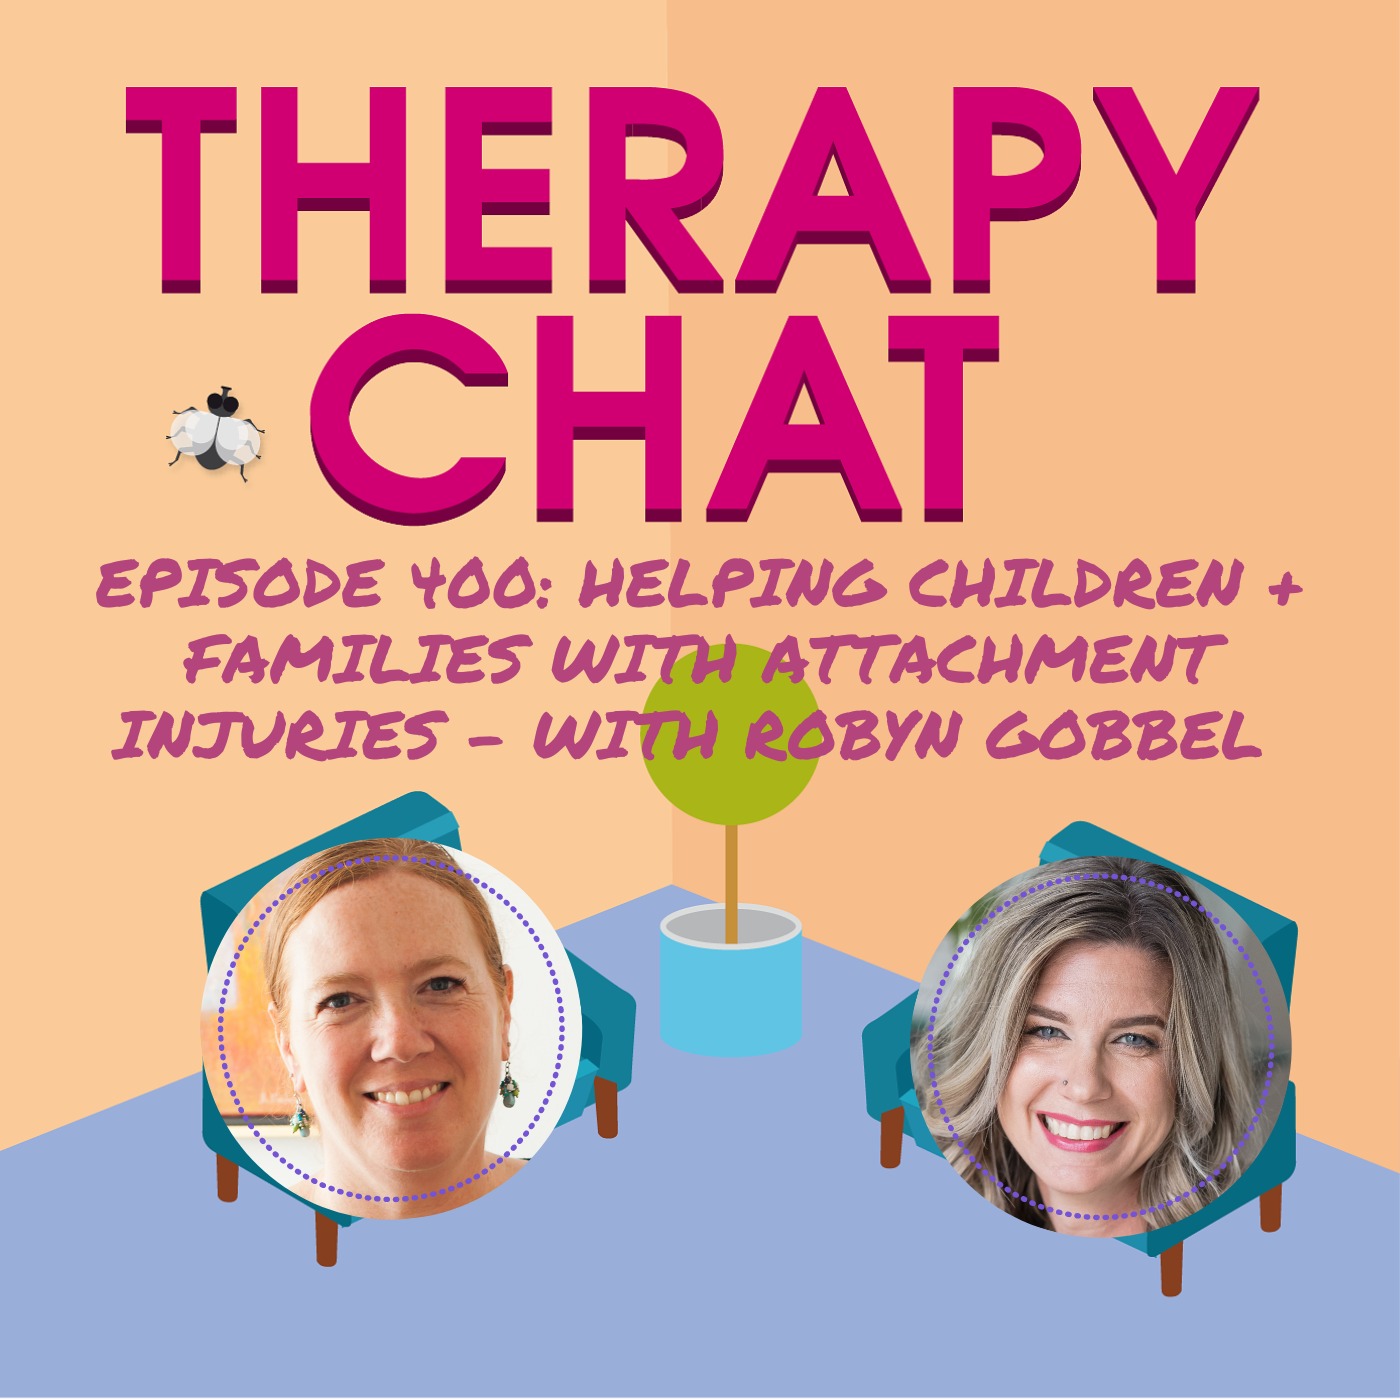 400: Helping Children + Families With Attachment Injuries - With Robyn Gobbel